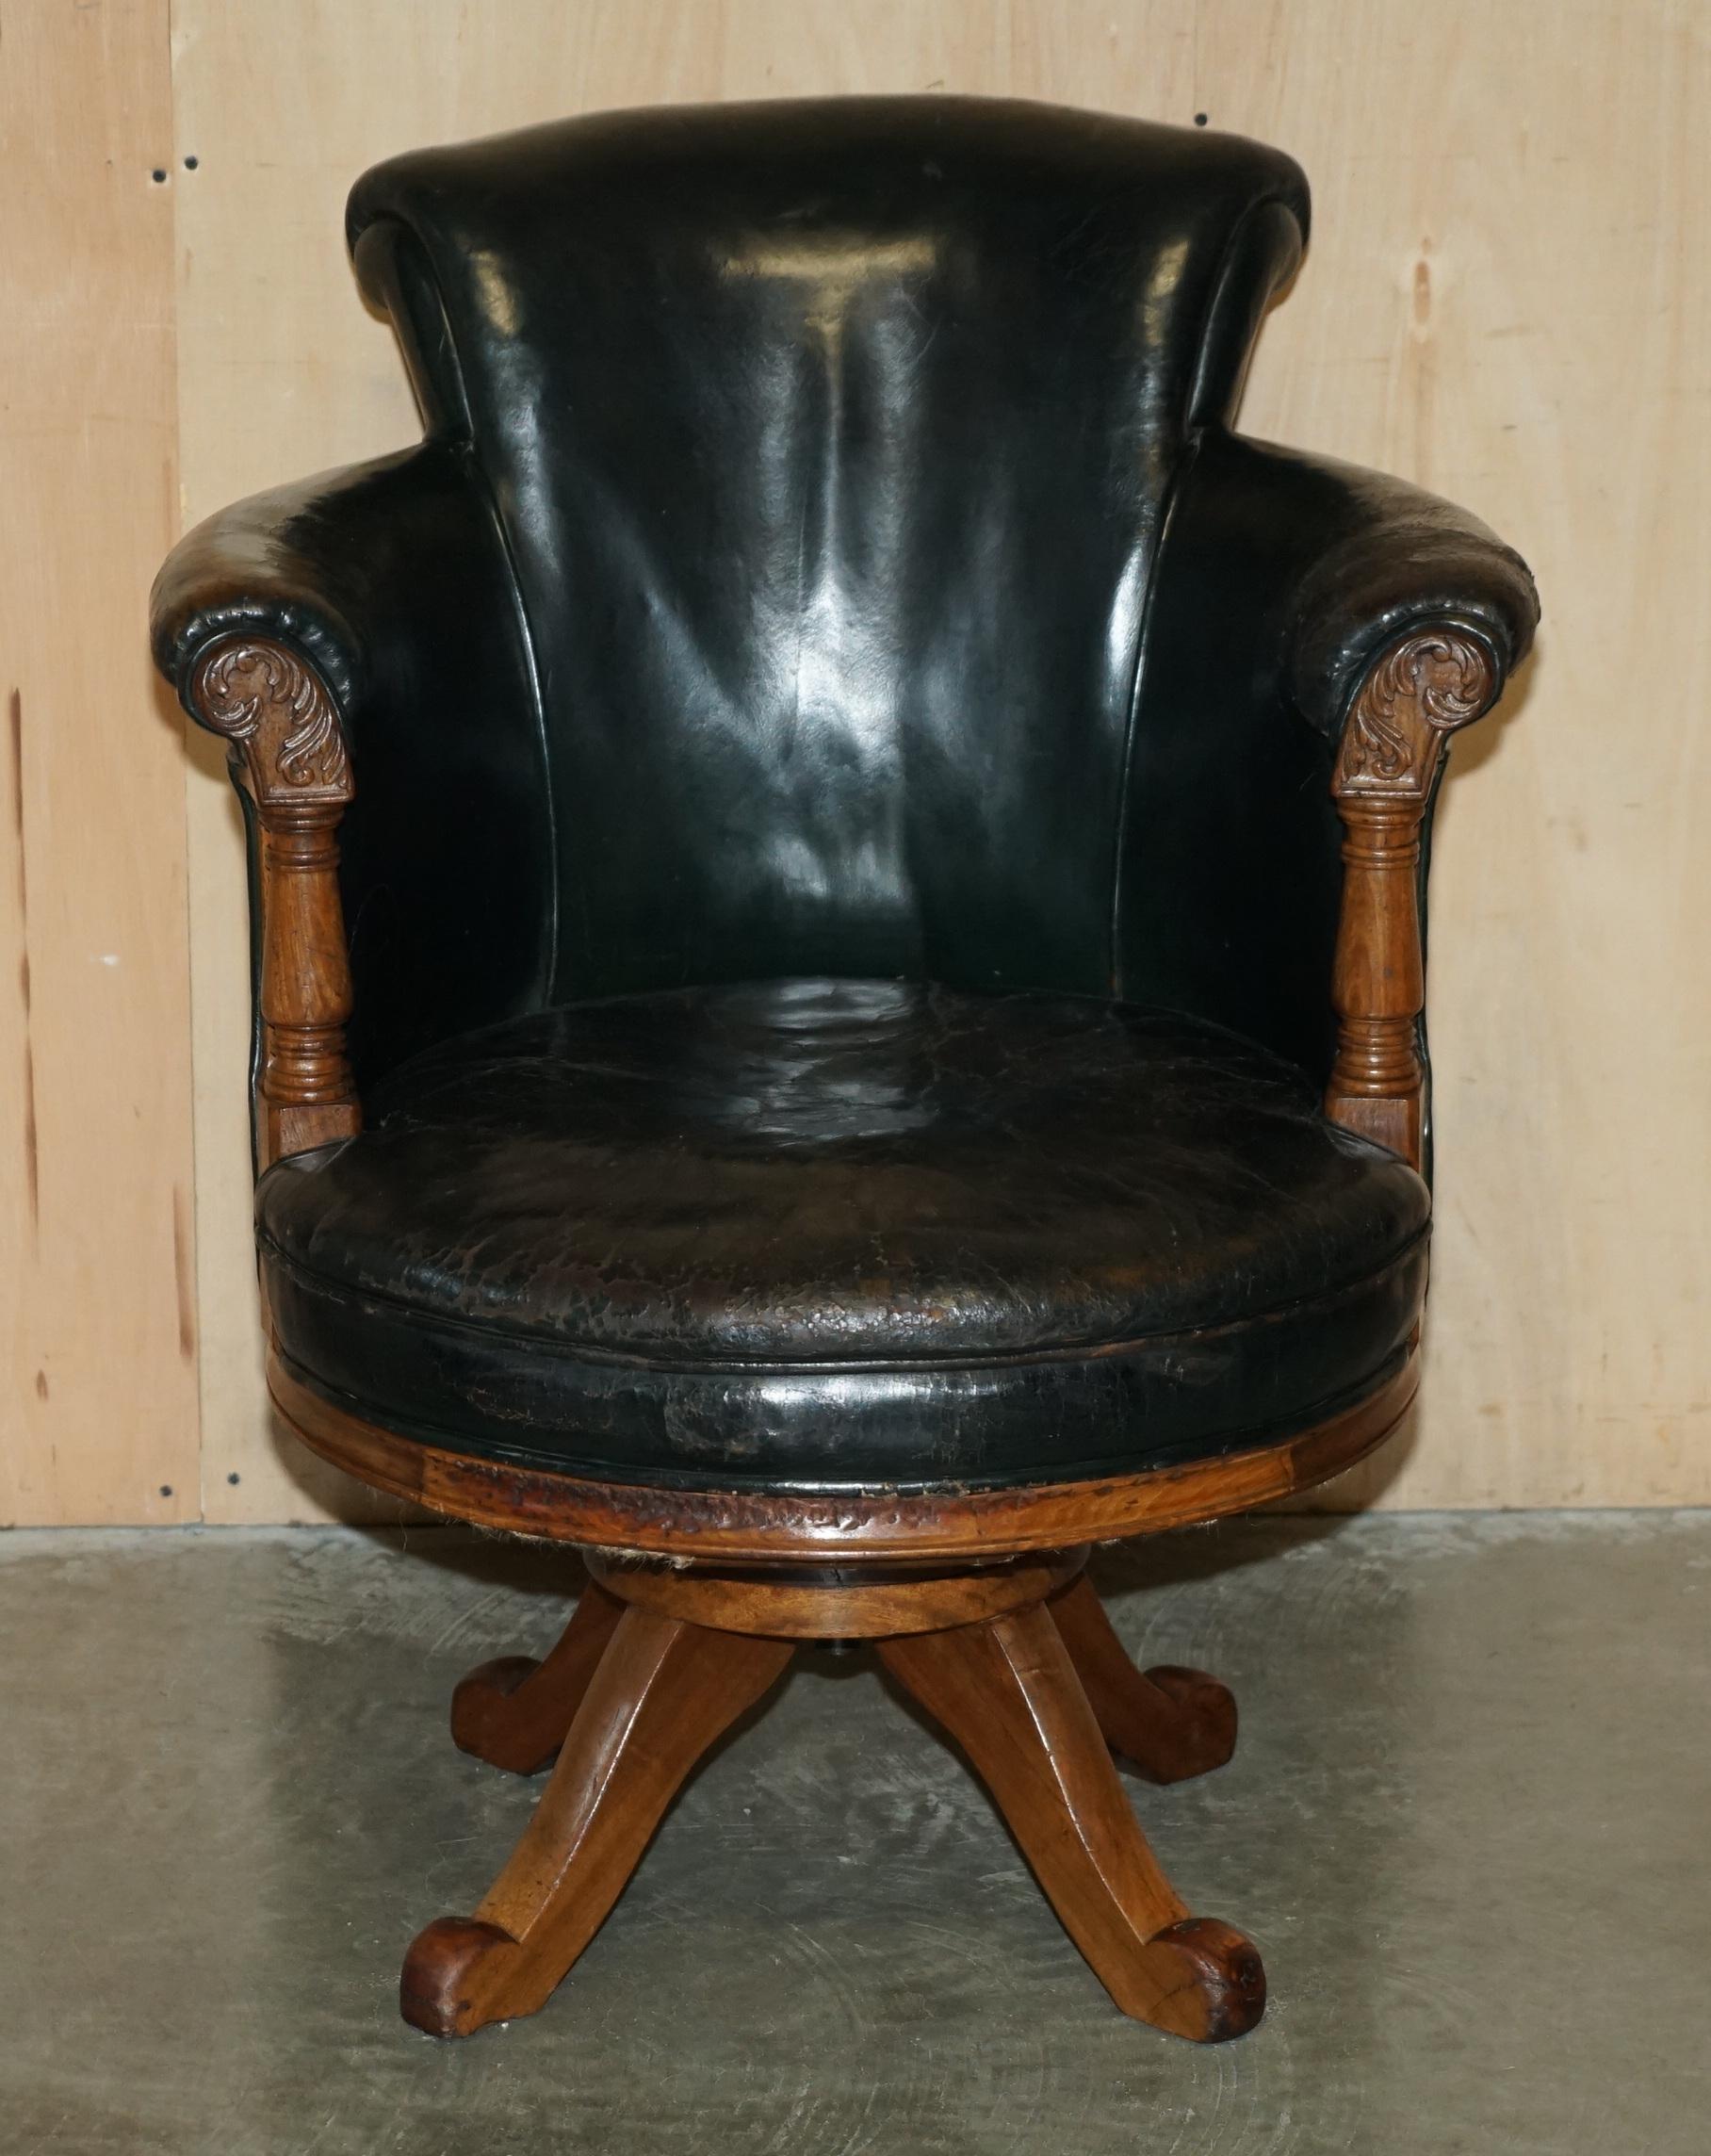 Royal House Antiques

Royal House Antiques is delighted to offer for sale this stunning original, circa 1830 hand carved solid Walnut Ship captains swivel armchair with early dark petrol green / black leather upholstery 

Please note the delivery